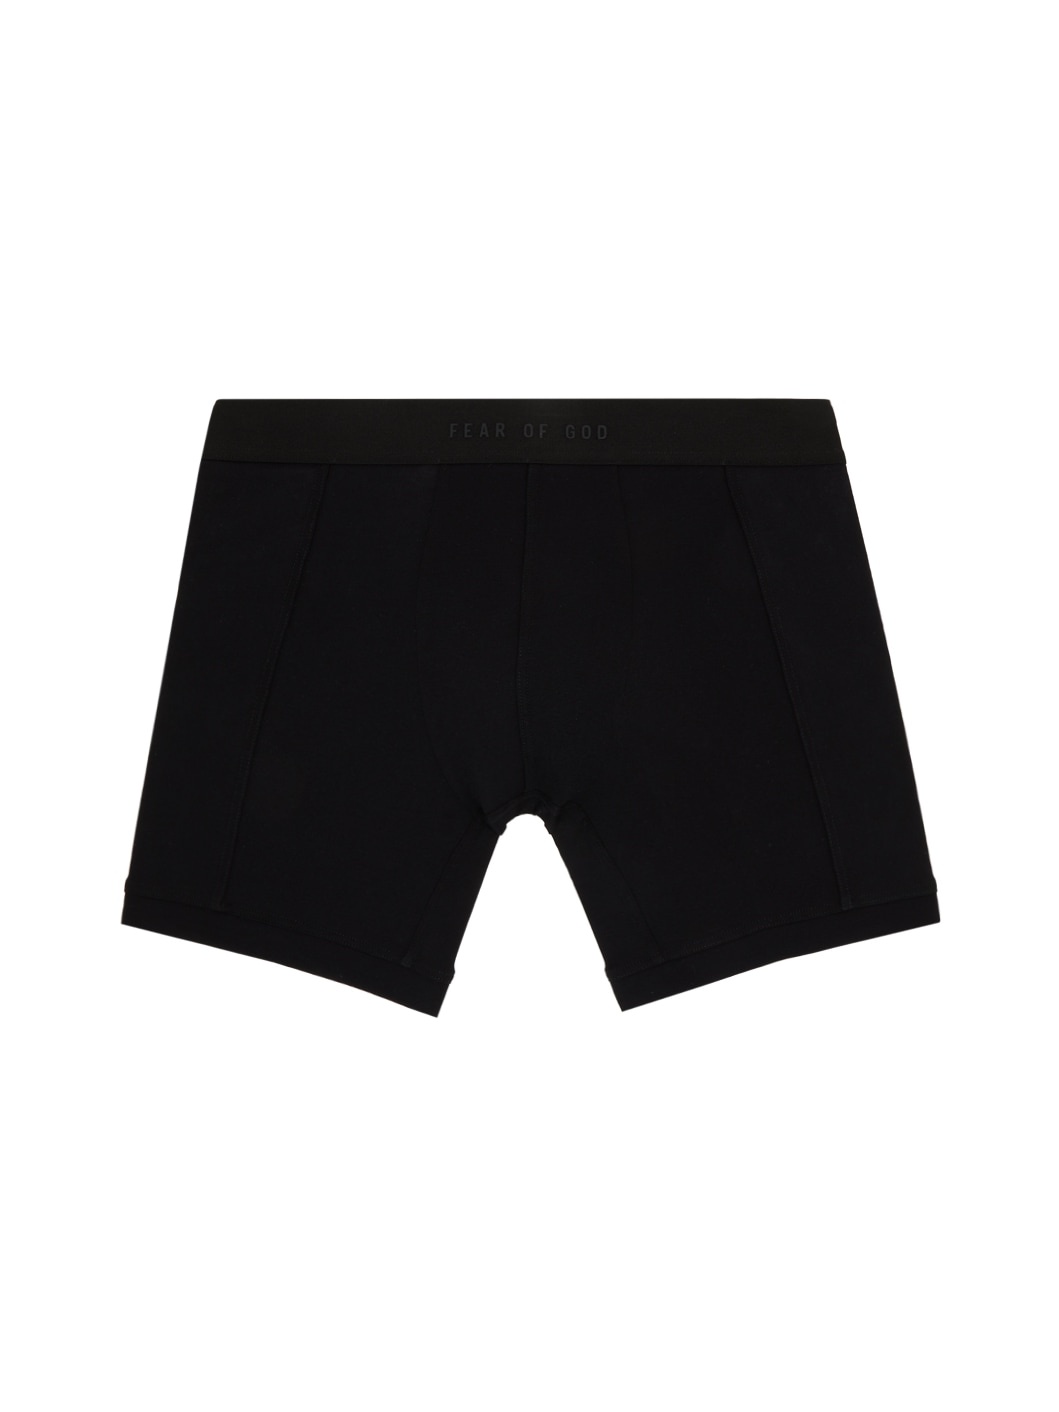 Two-Pack Black Boxer Briefs - 2